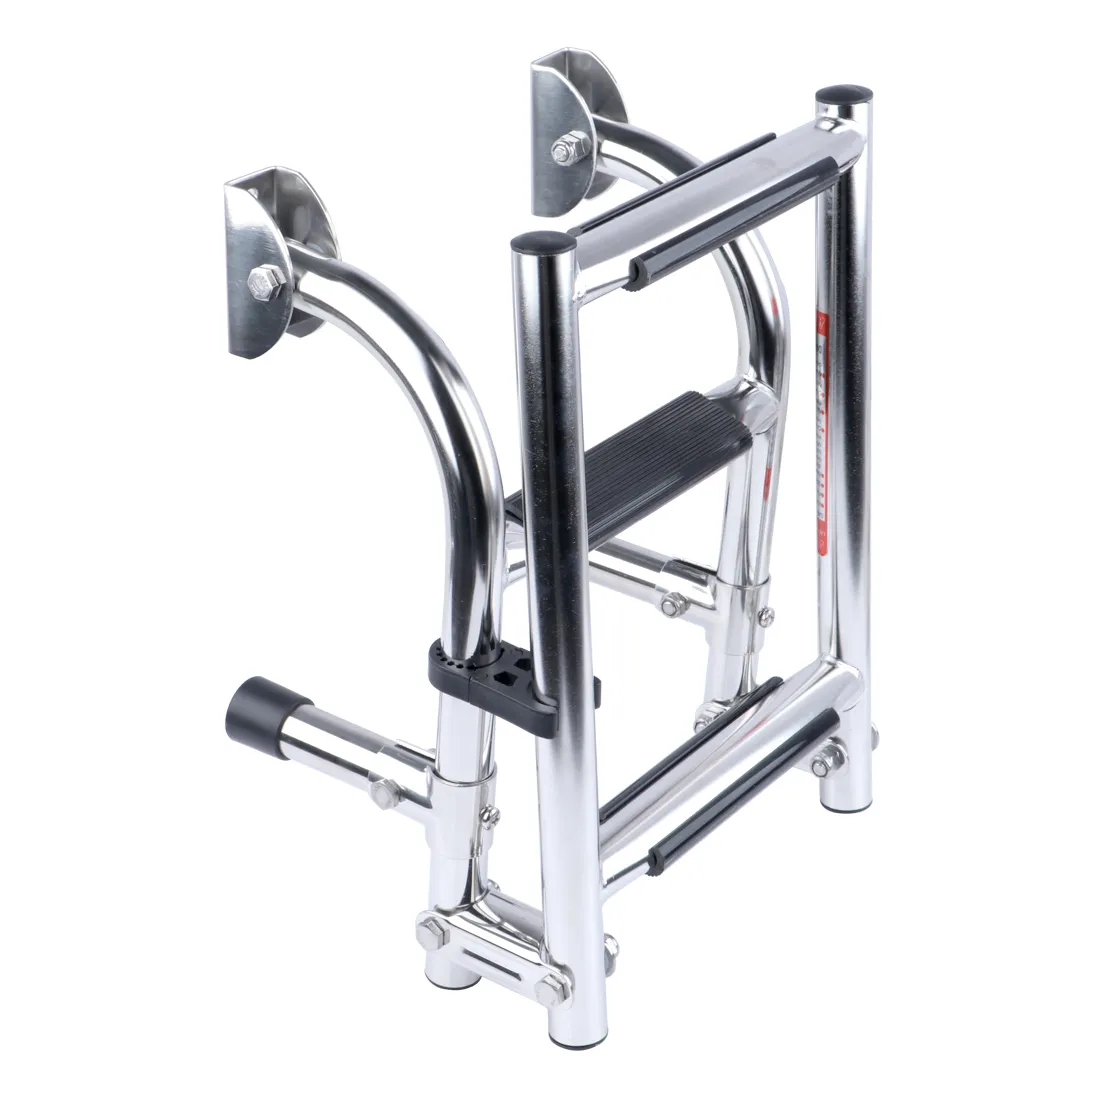 Boat Accessories Marine 3 Step Folding Ladder Boat Marine Stainless Steel - $87.16